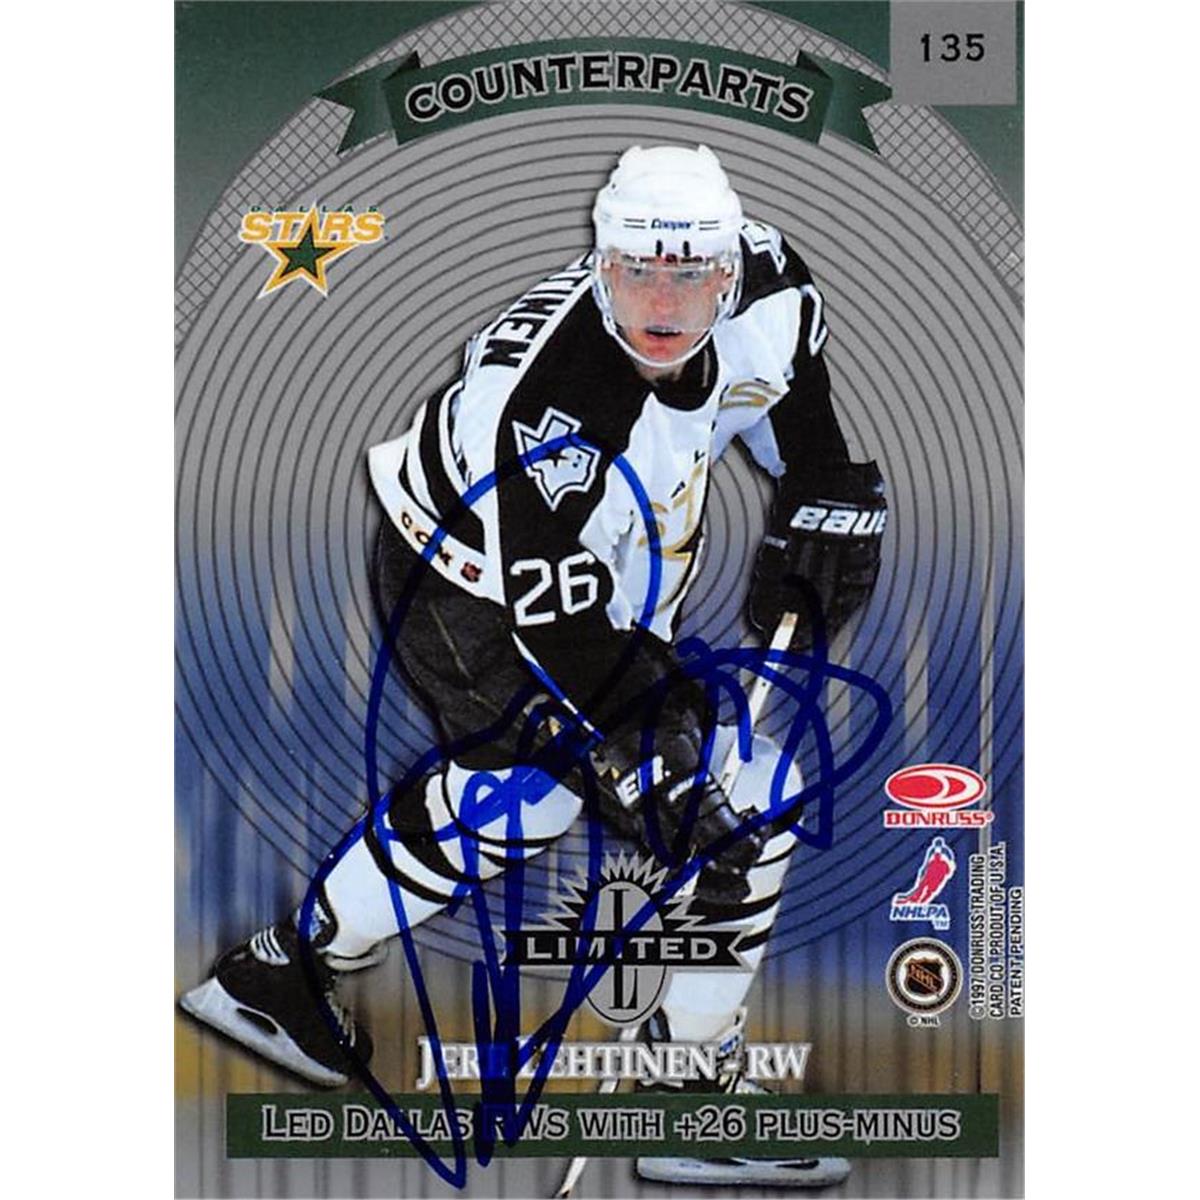 Picture of Autograph Warehouse 466196 Jere Lehtinen Autographed Dallas Stars Hockey Card 1997 Donruss Limited Counterparts No. 135